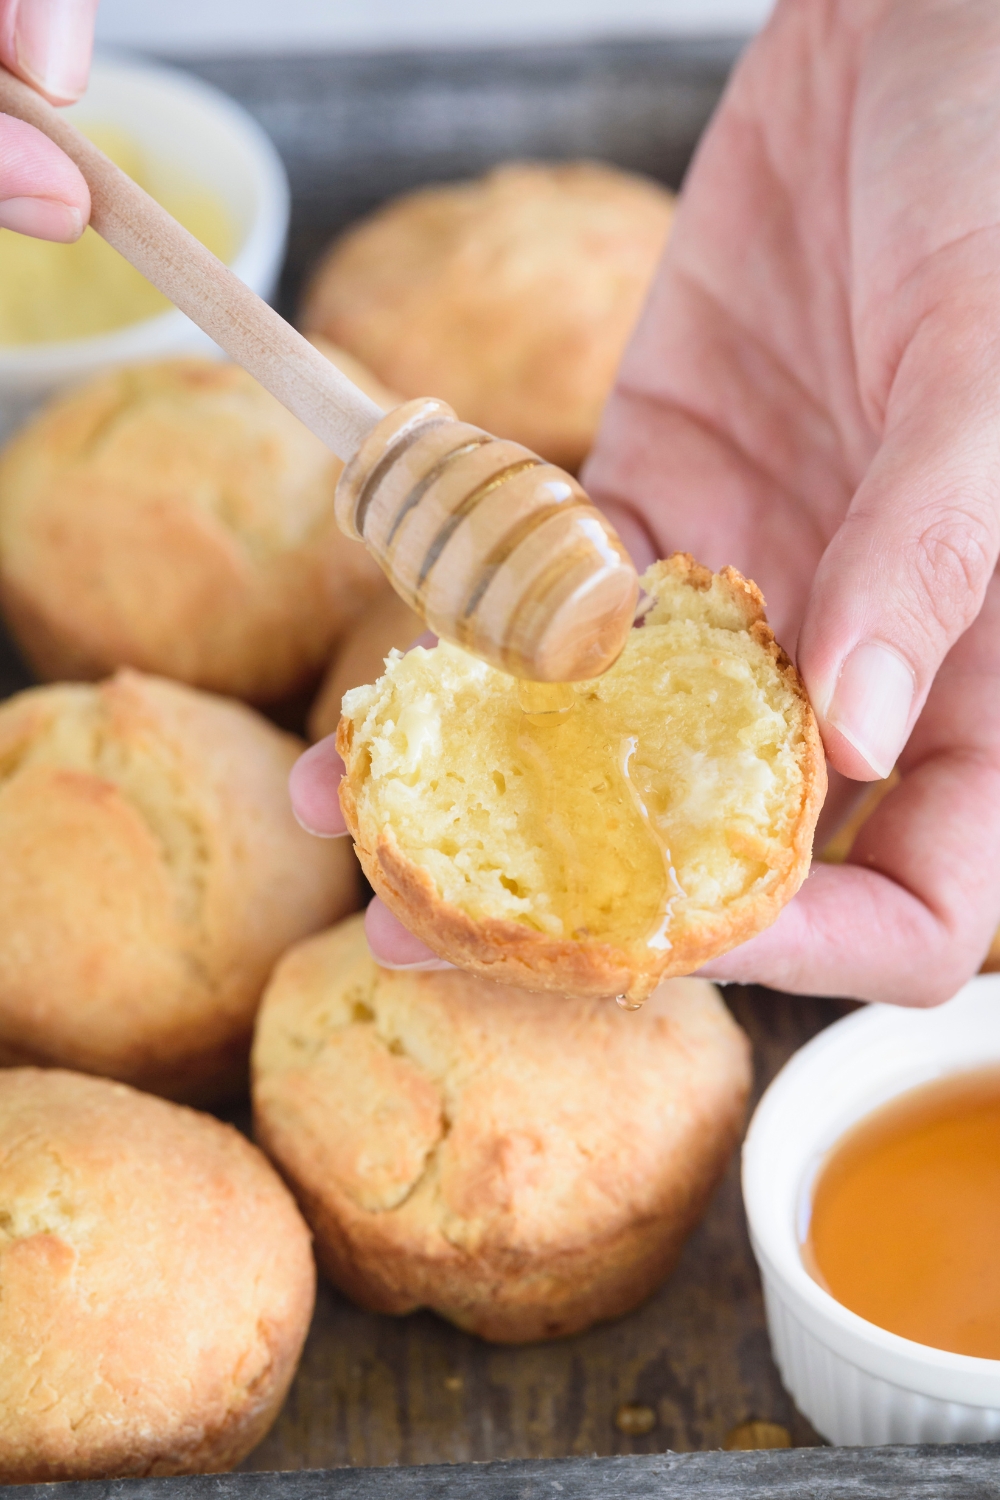 Hands drizzling baked biscuits with honey